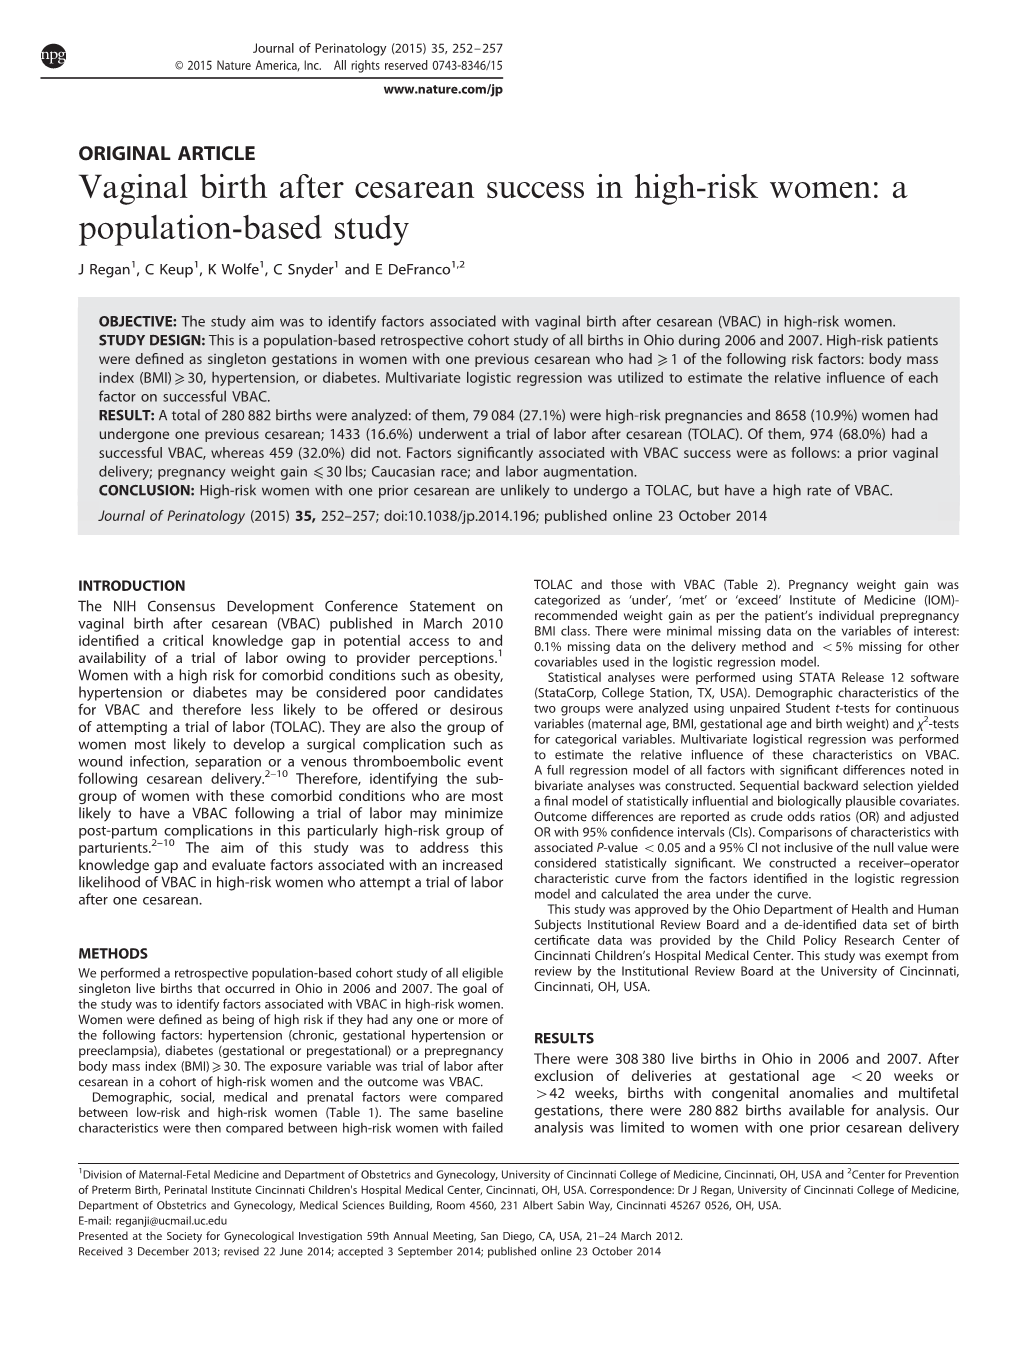 Vaginal Birth After Cesarean Success in High-Risk Women: a Population-Based Study